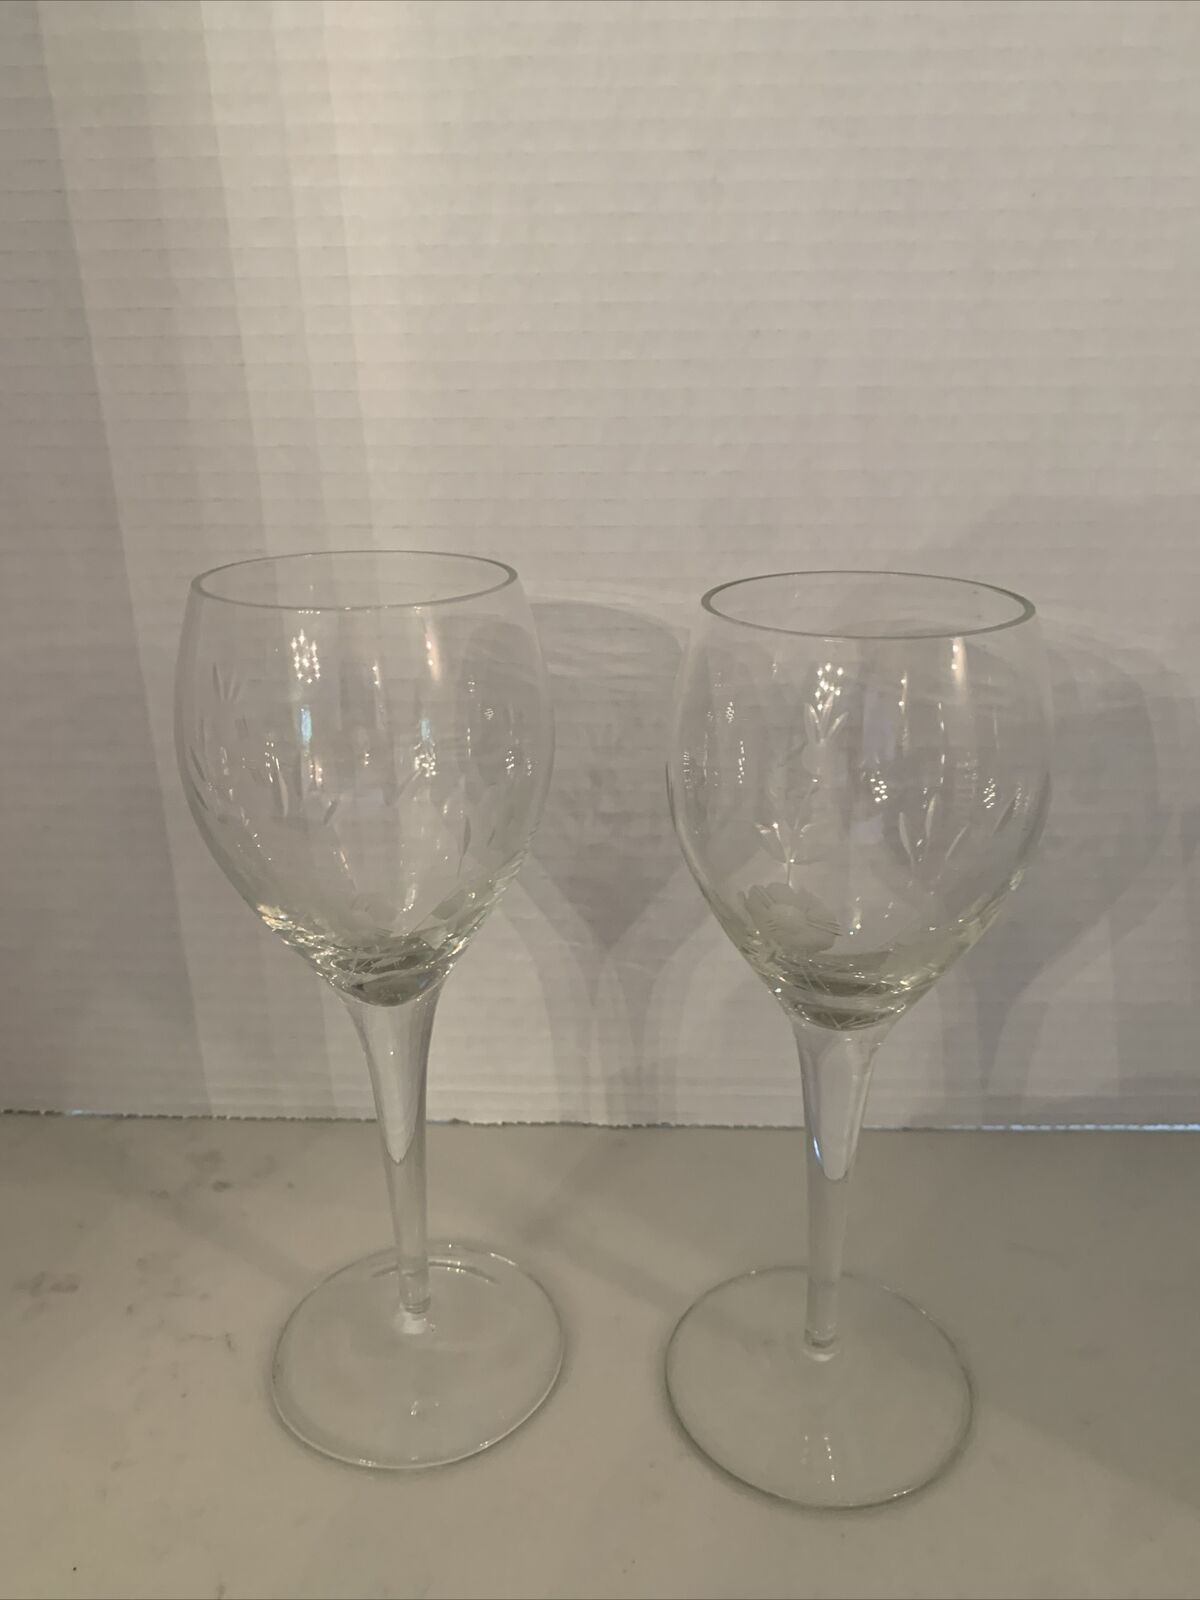 Vintage ETCHED CRYSTAL WINE GLASSES Floral REPLACEMENT CRYSTAL GLASS Set Of 2